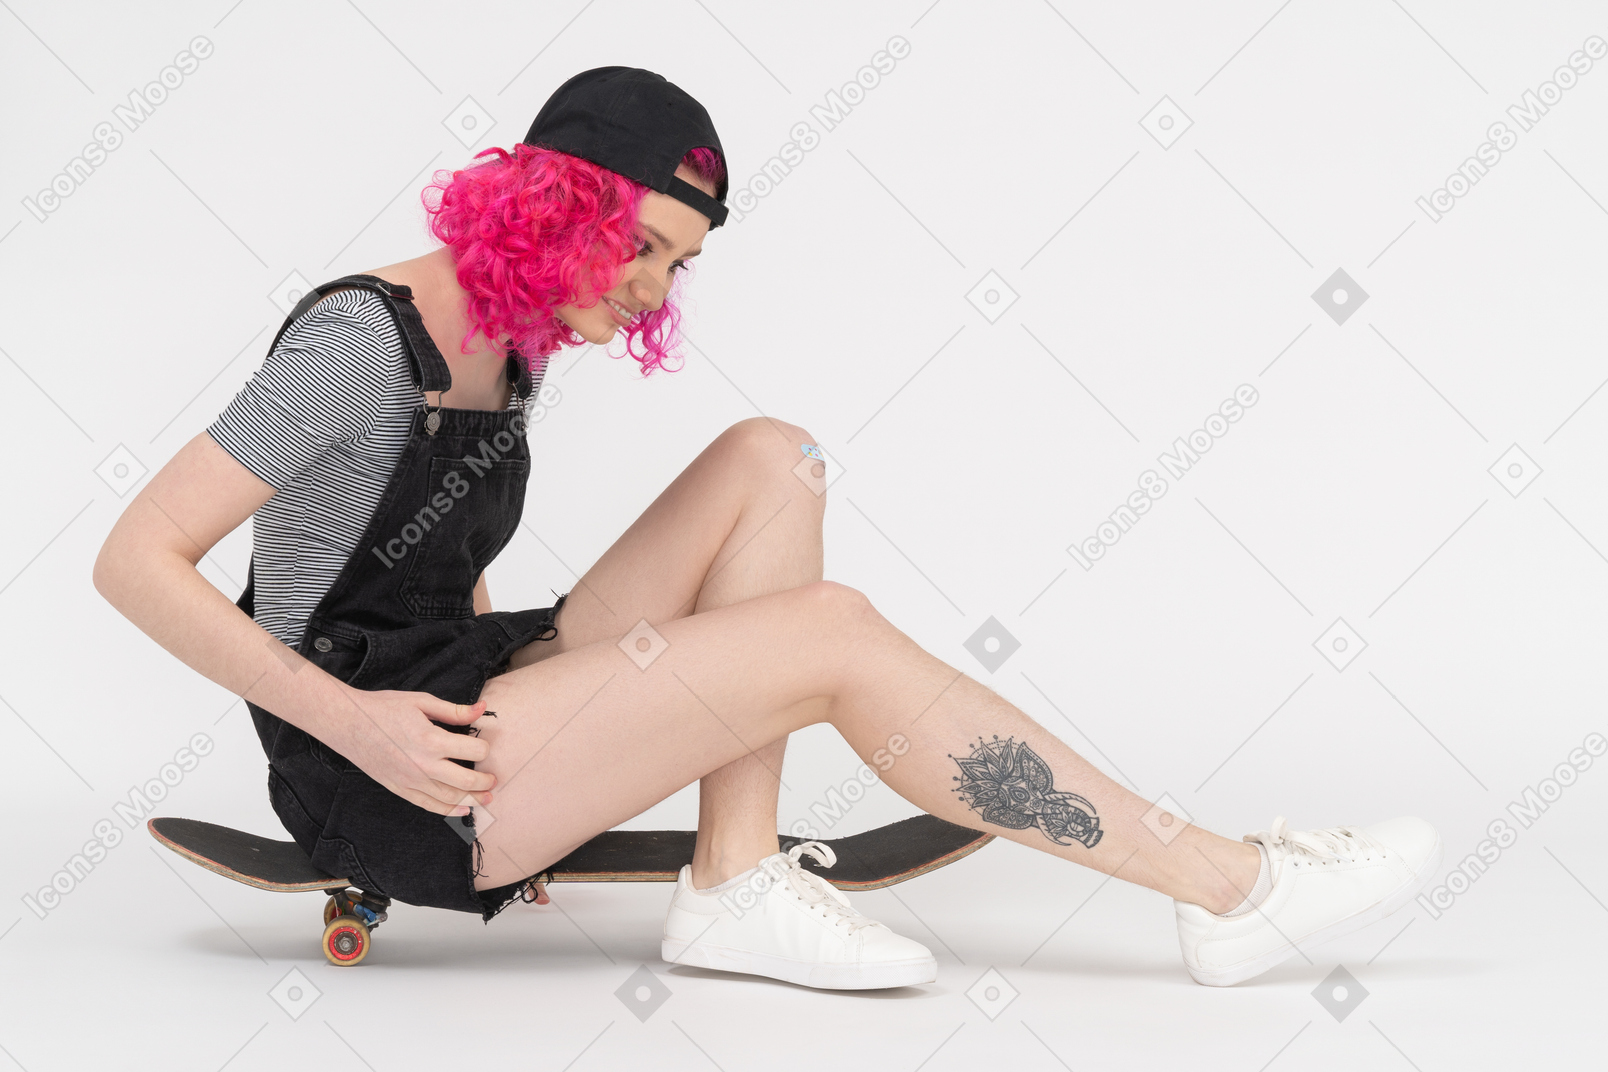 Girl sitting on a skateboard and looking at her legs